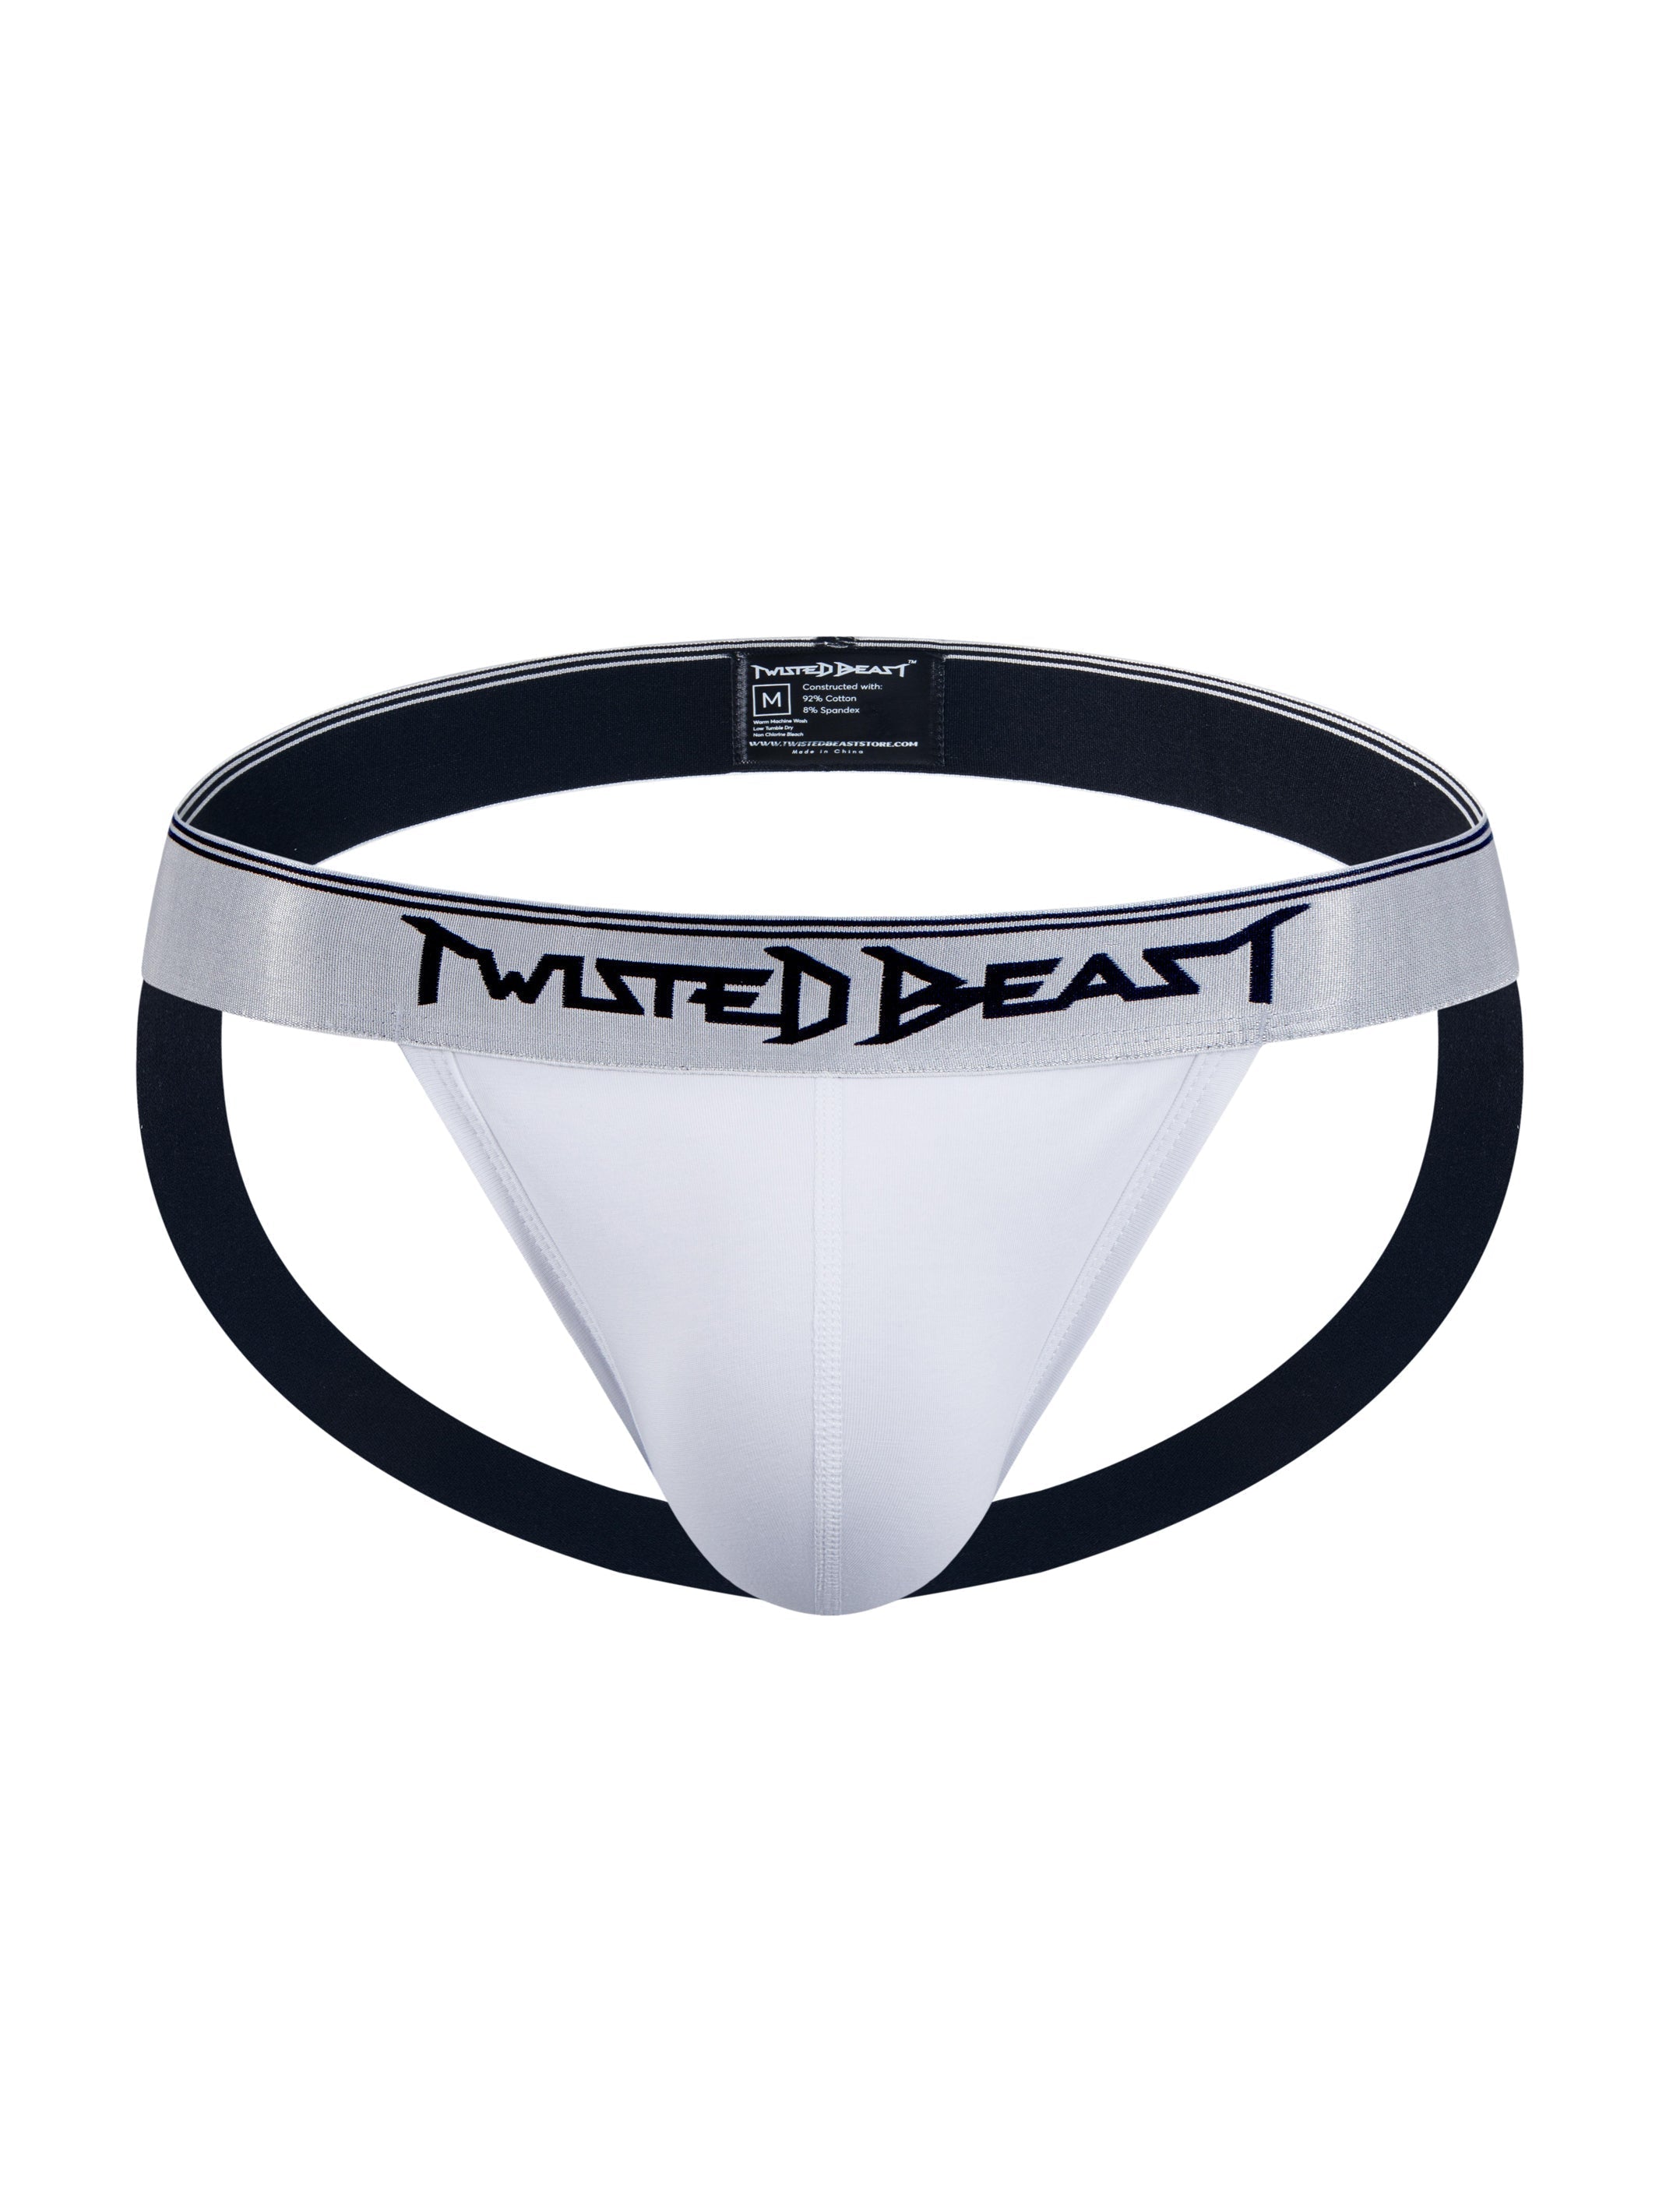 A front facing product photo of a white Y2K Jock showing the Twisted Beast logo.